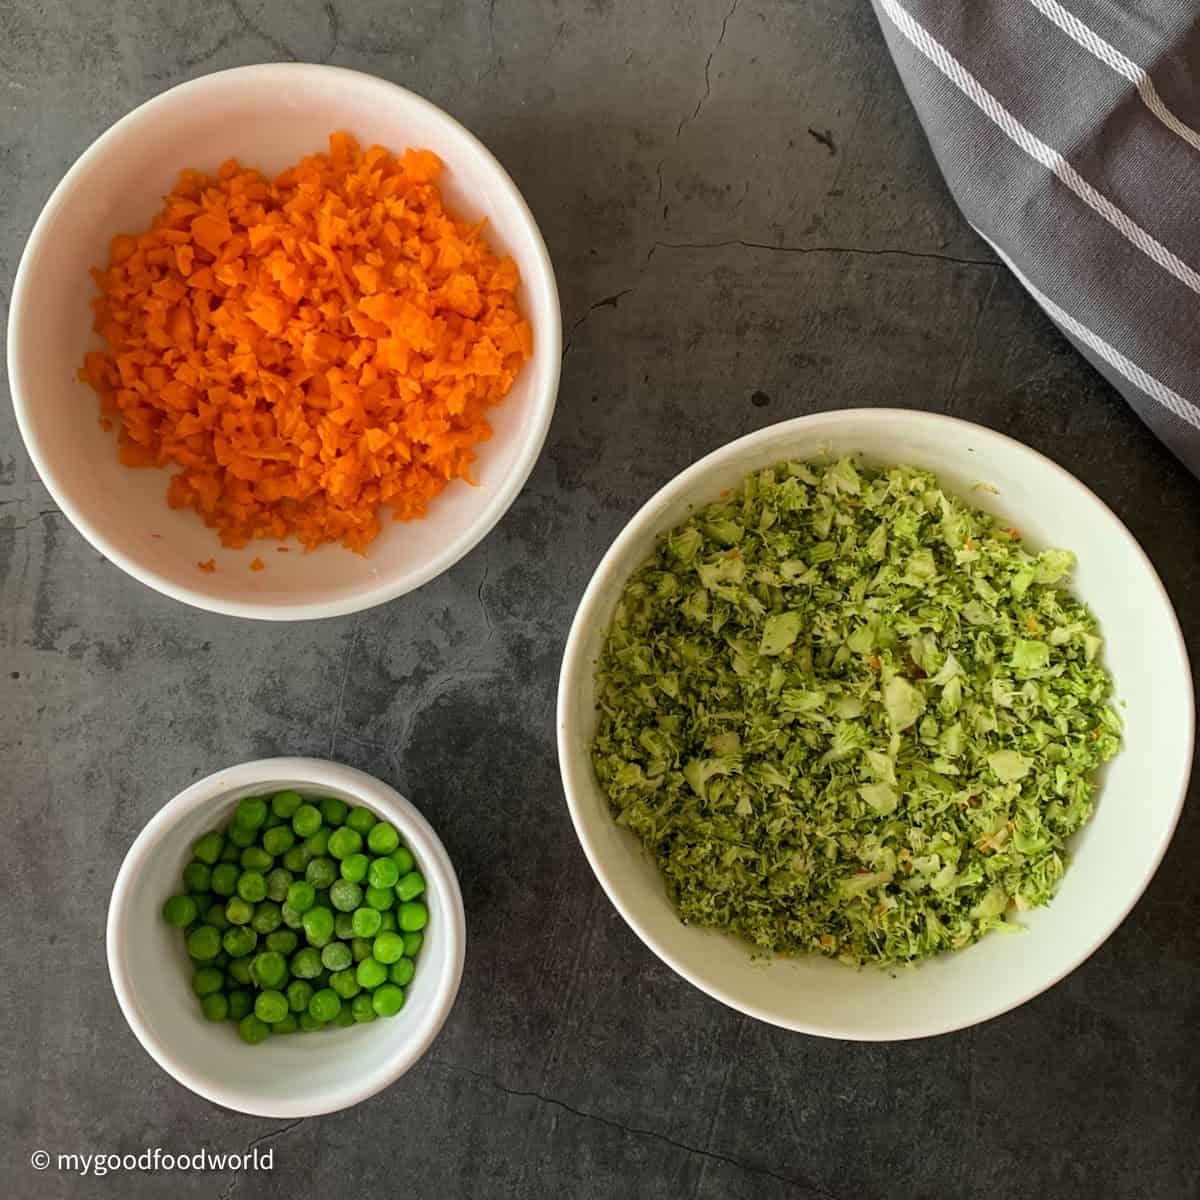 Finely chopped broccoli and carrots are placed in round white bowls along with a bowl of green peas.